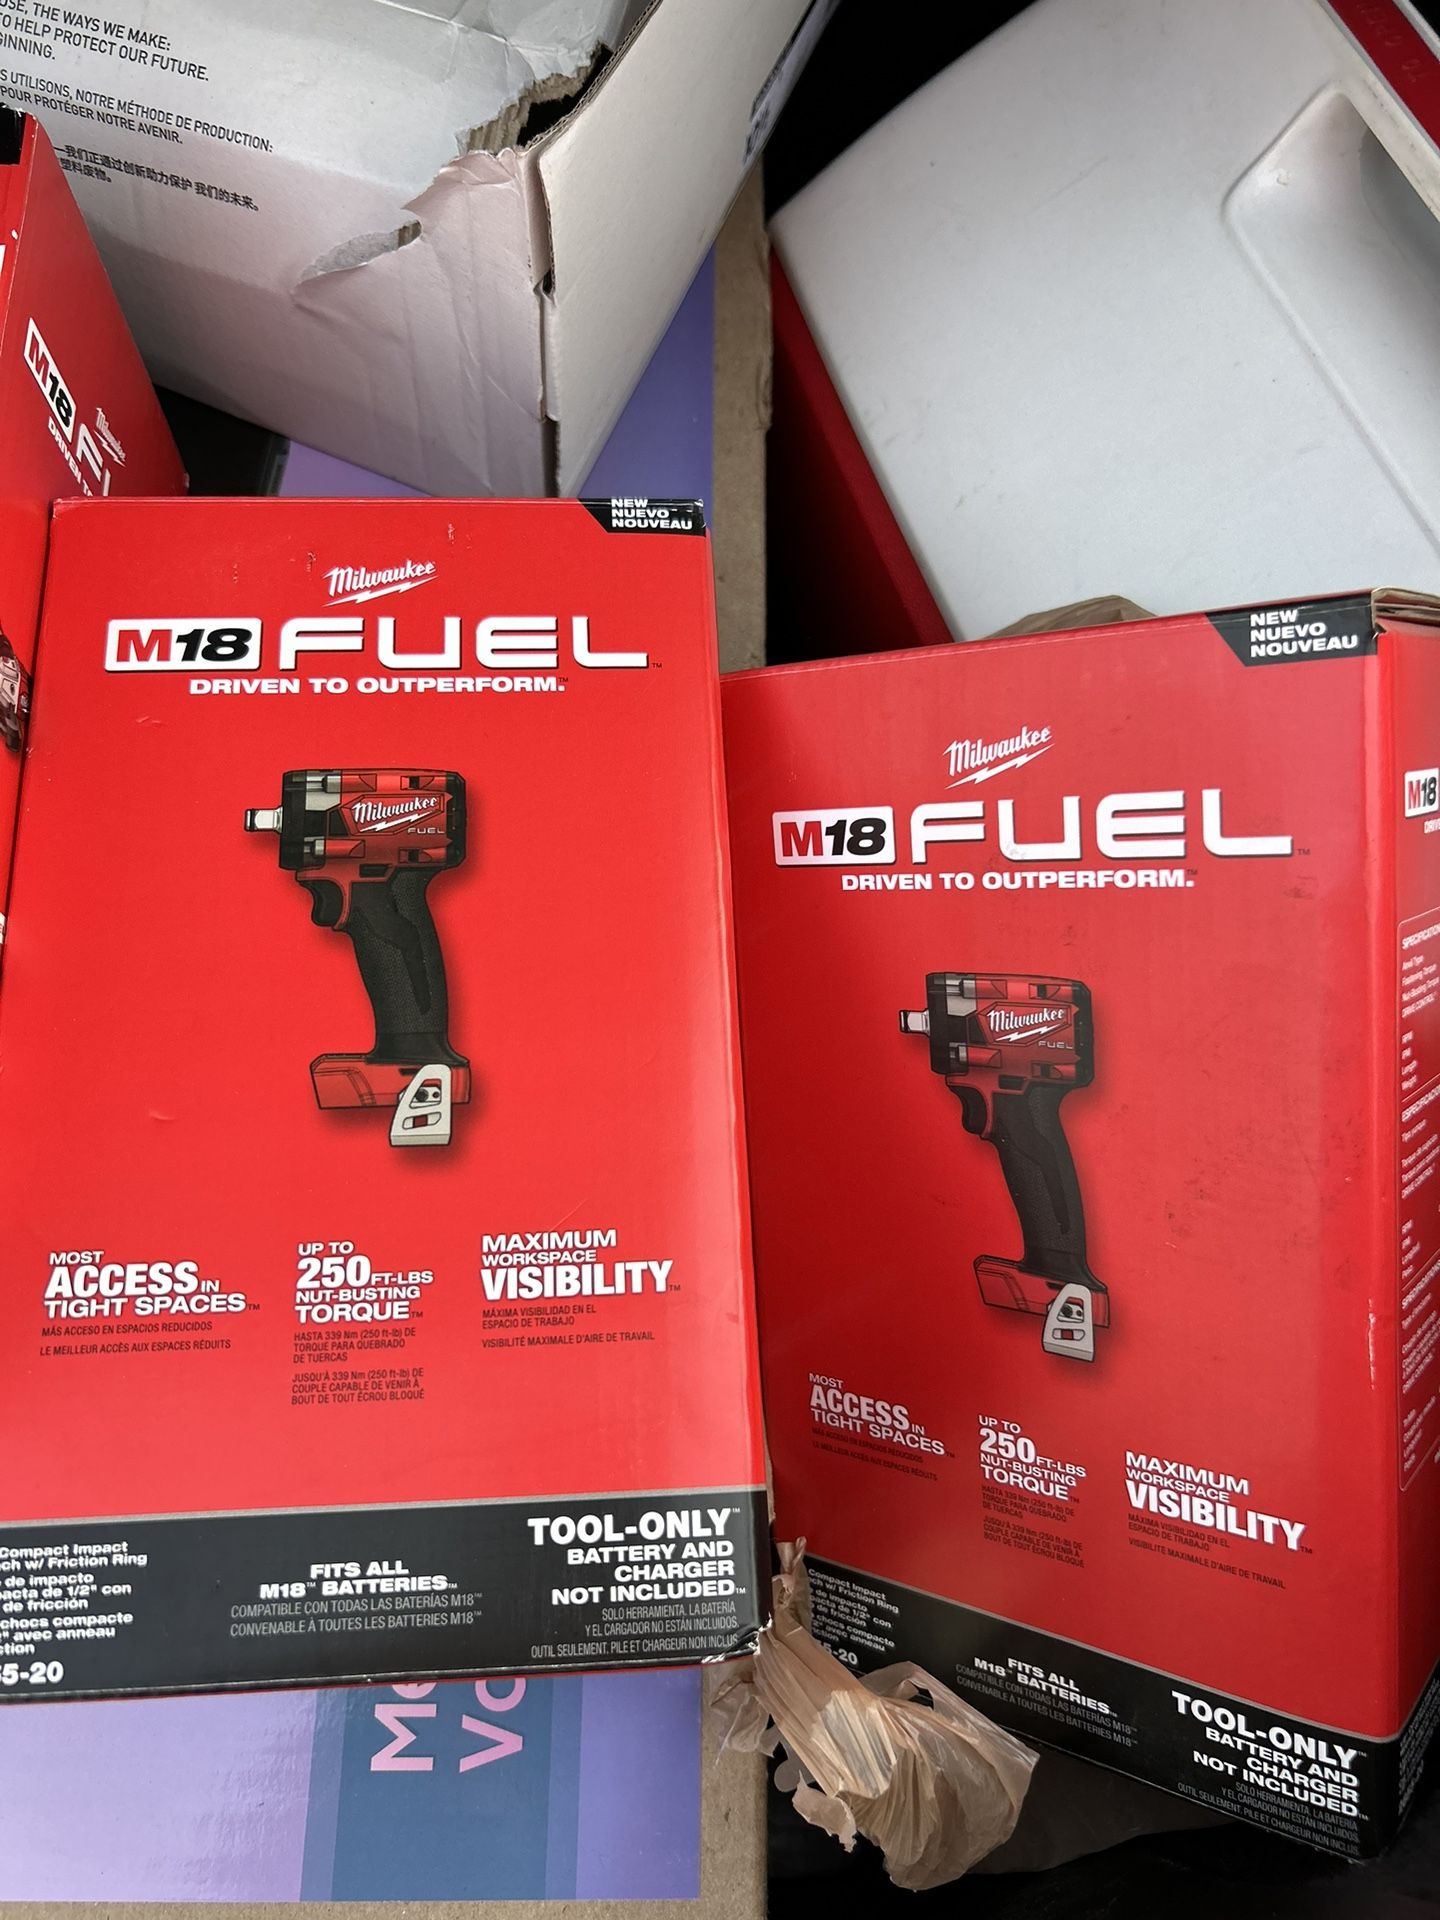 M18 Fuel Compact 1/2 Inch Impact Wrench